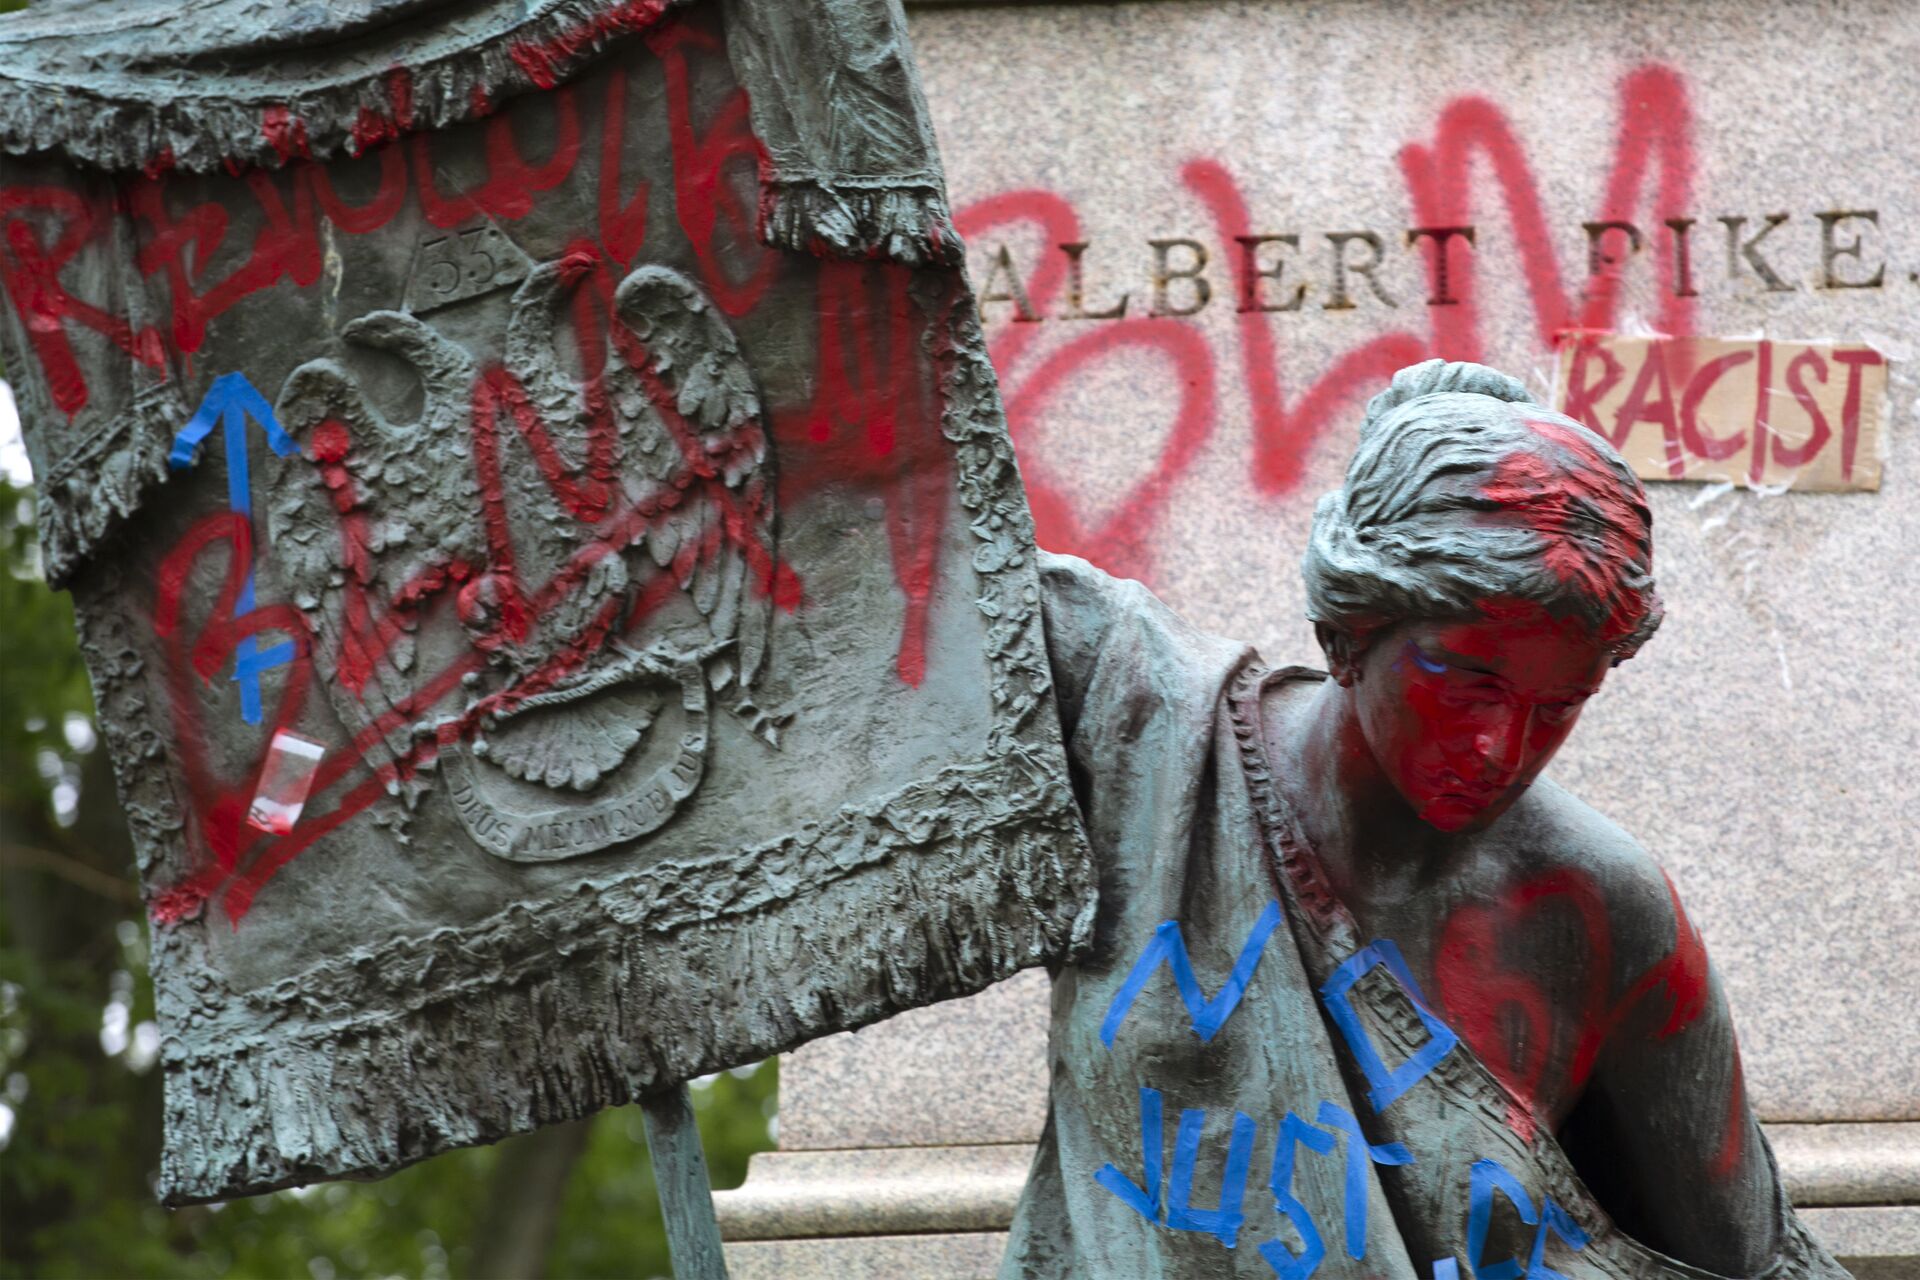 The bronze sculpture representing the Goddess of Masonry on the base of the statue of a Confederate general, Albert Pike, is seen with red paint, after protestors toppled Pike statue's and set on fire early Saturday, June 20, 2020, in Washington. It comes on Juneteenth, the day marking the end of slavery in the United States, amid continuing anti-racism demonstrations following the death of George Floyd in Minneapolis - Sputnik International, 1920, 07.09.2021